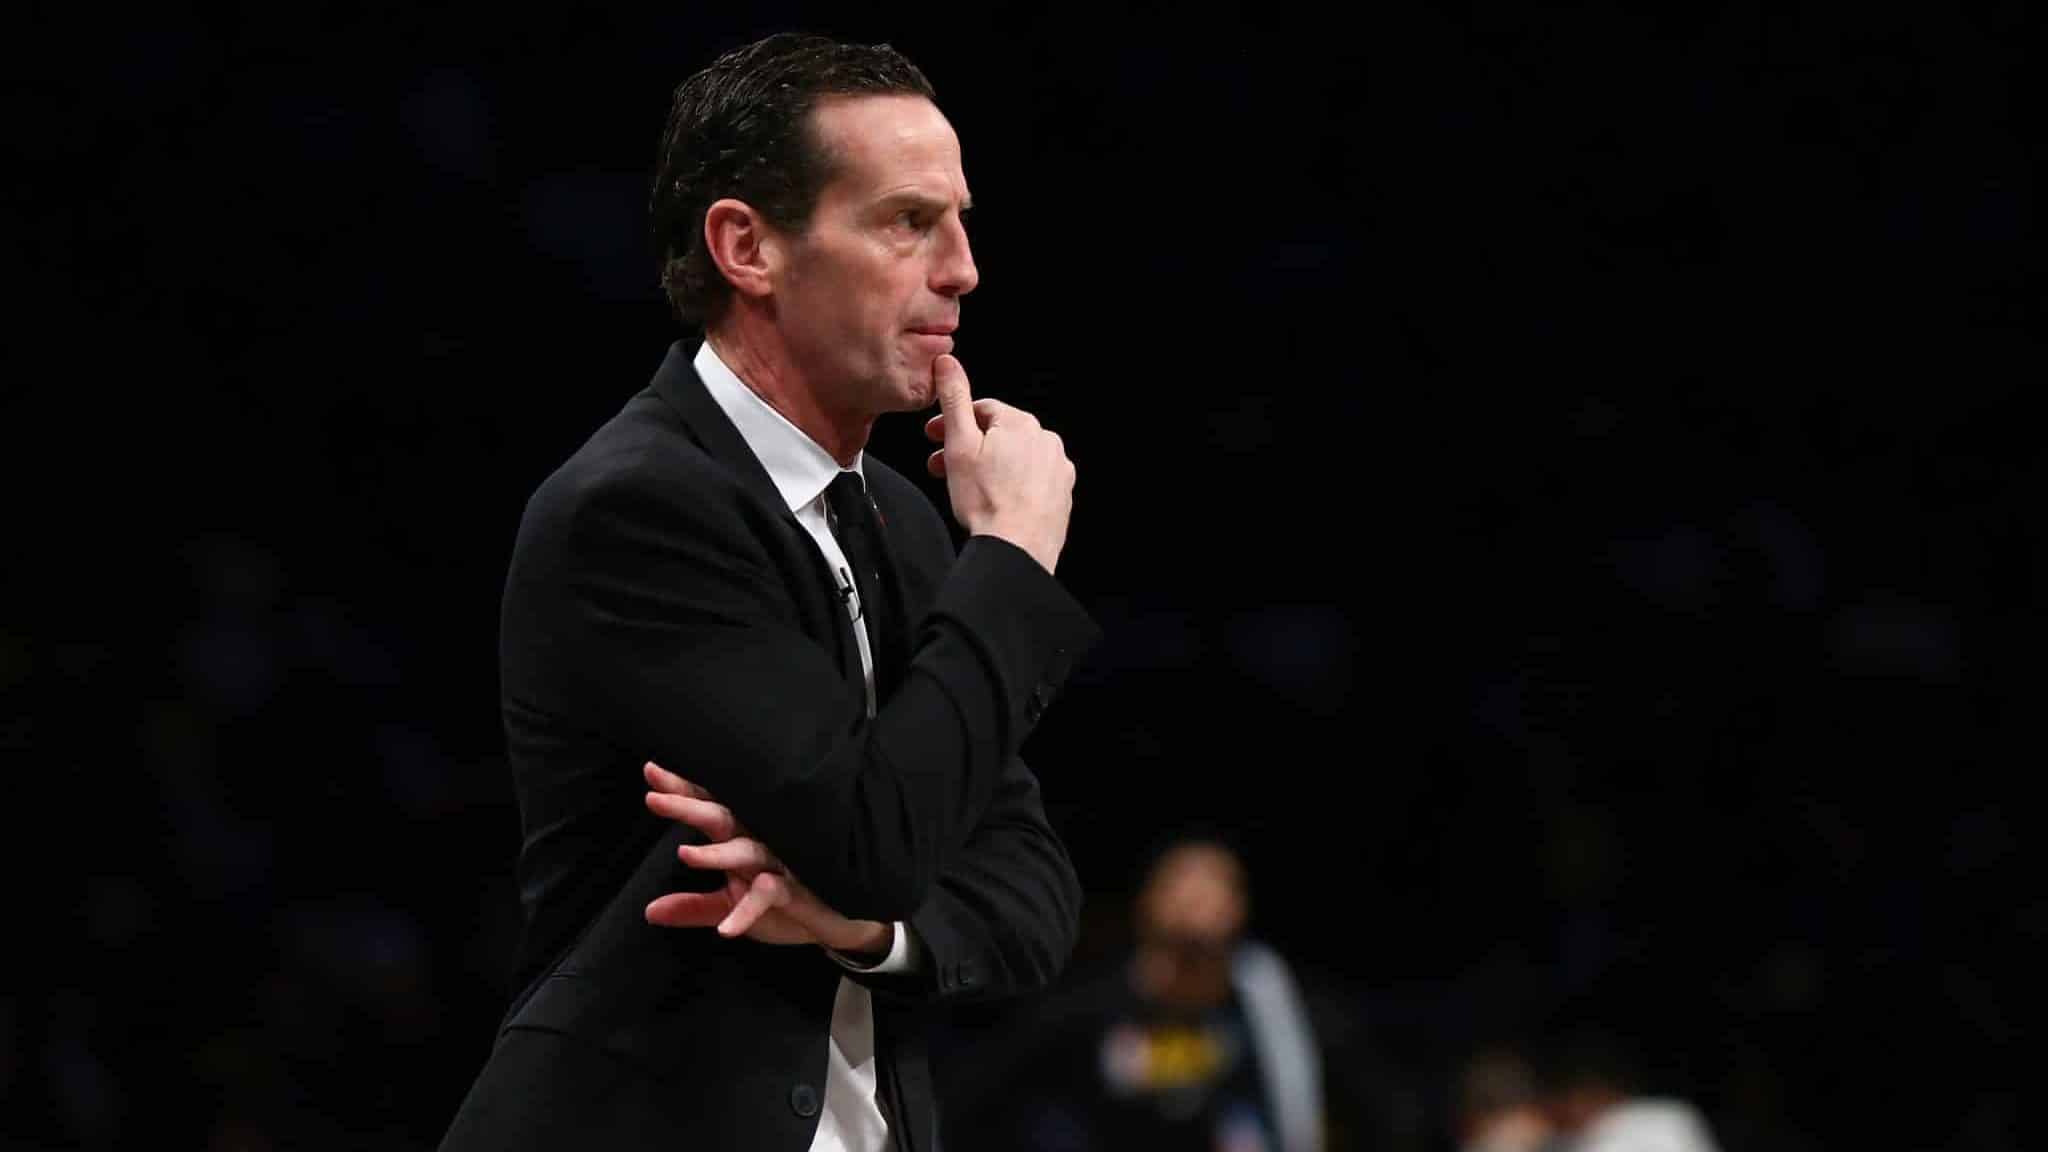 NEW YORK, NEW YORK - JANUARY 23: Head Coach Kenny Atkinson of the Brooklyn Nets looks on against the Los Angeles Lakers at Barclays Center on January 23, 2020 in New York City. NOTE TO USER: User expressly acknowledges and agrees that, by downloading and or using this photograph, User is consenting to the terms and conditions of the Getty Images License Agreement.